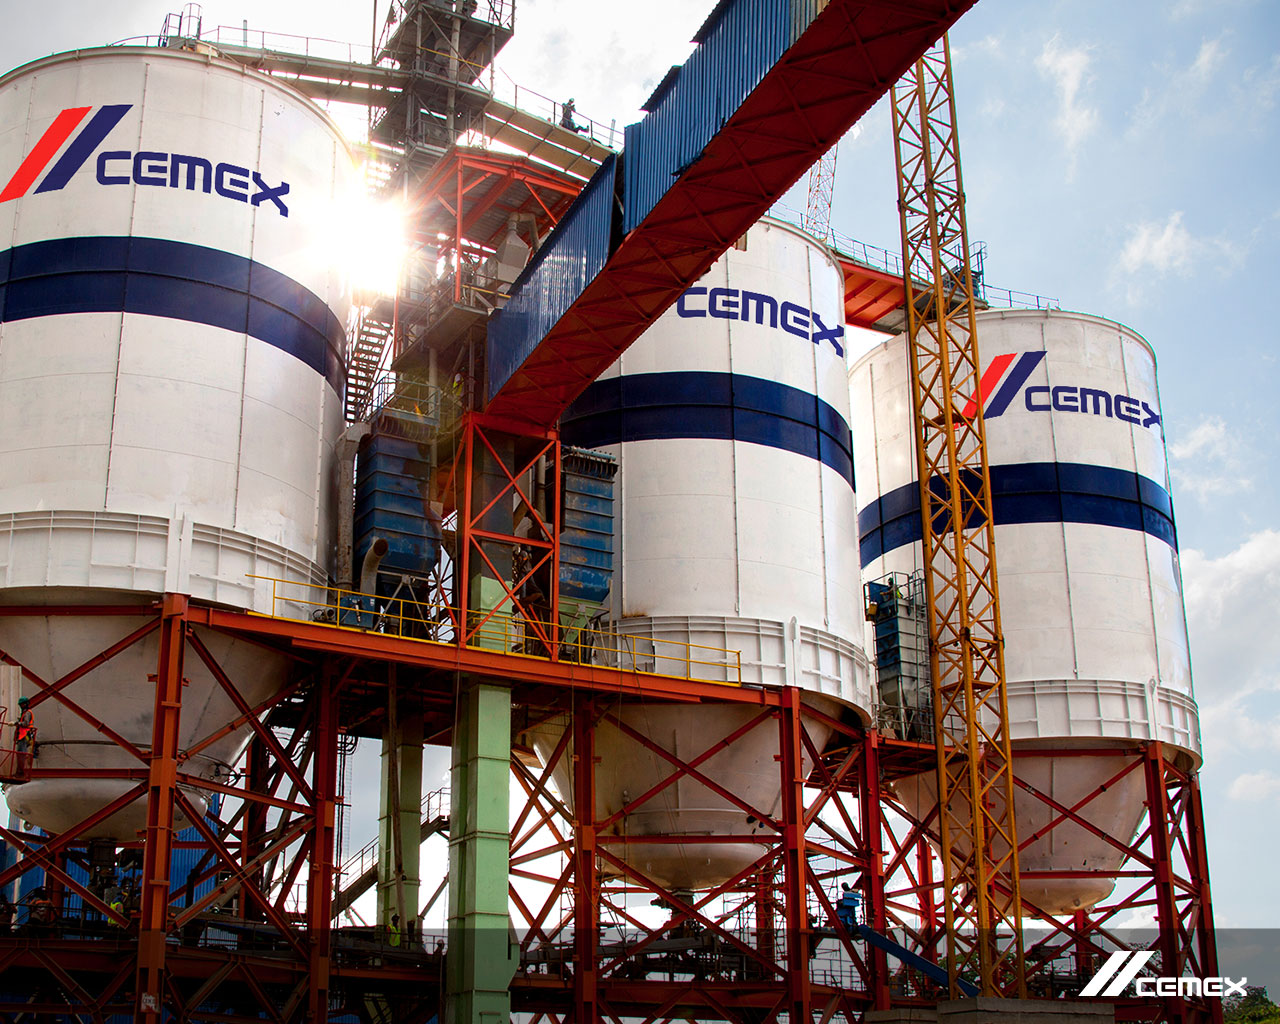 Forbes Recognises CEMEX As One Of The “World’s Best Regarded Companies